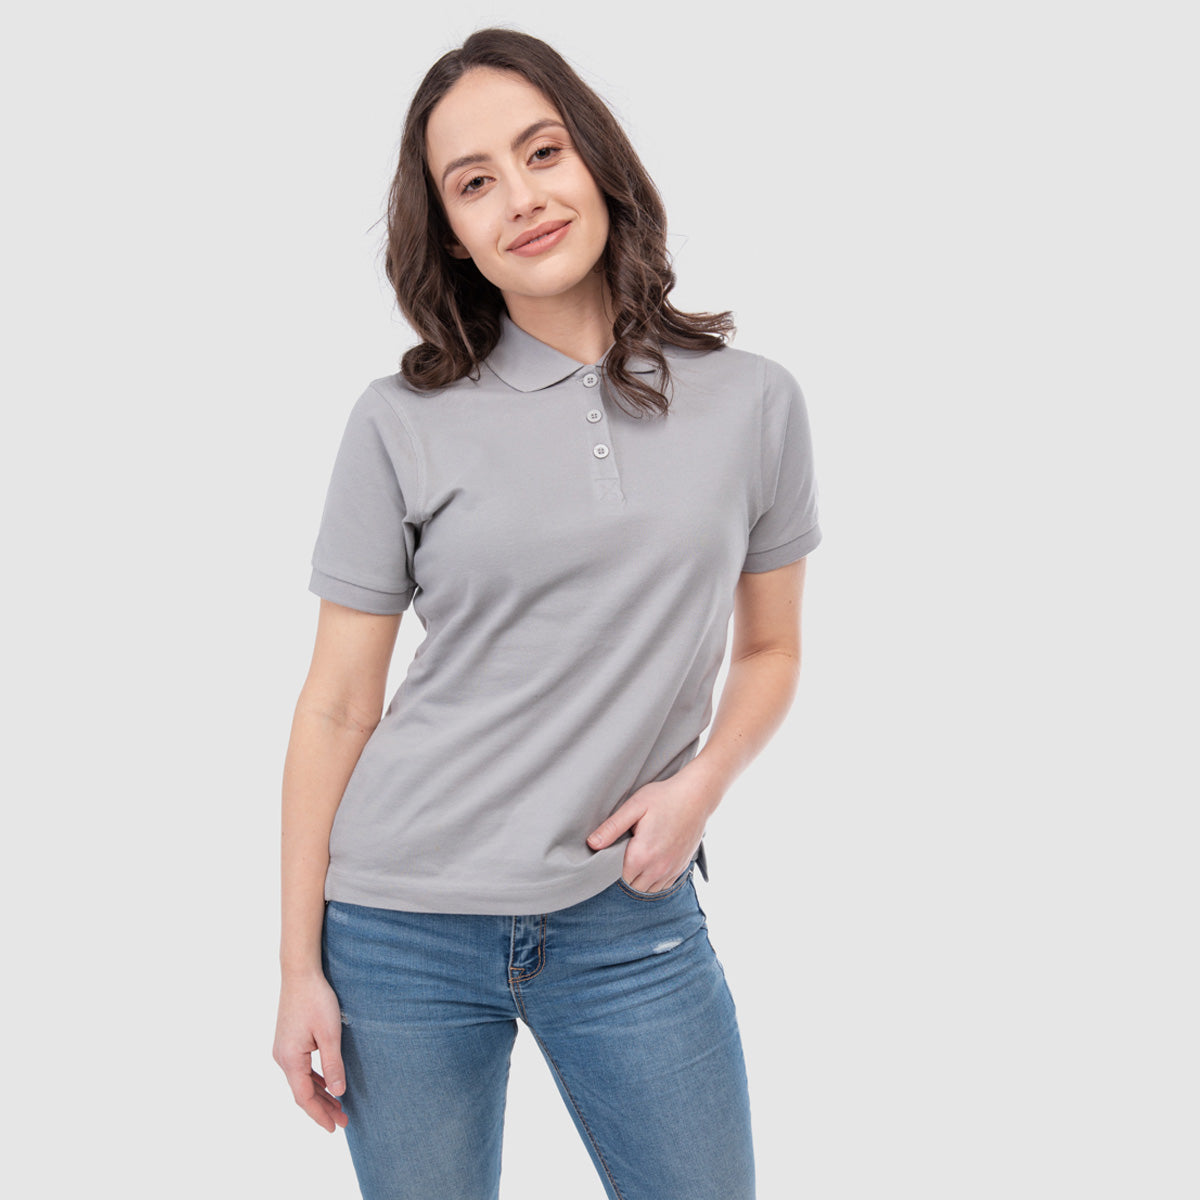 grey poloshirt for womens from switcher